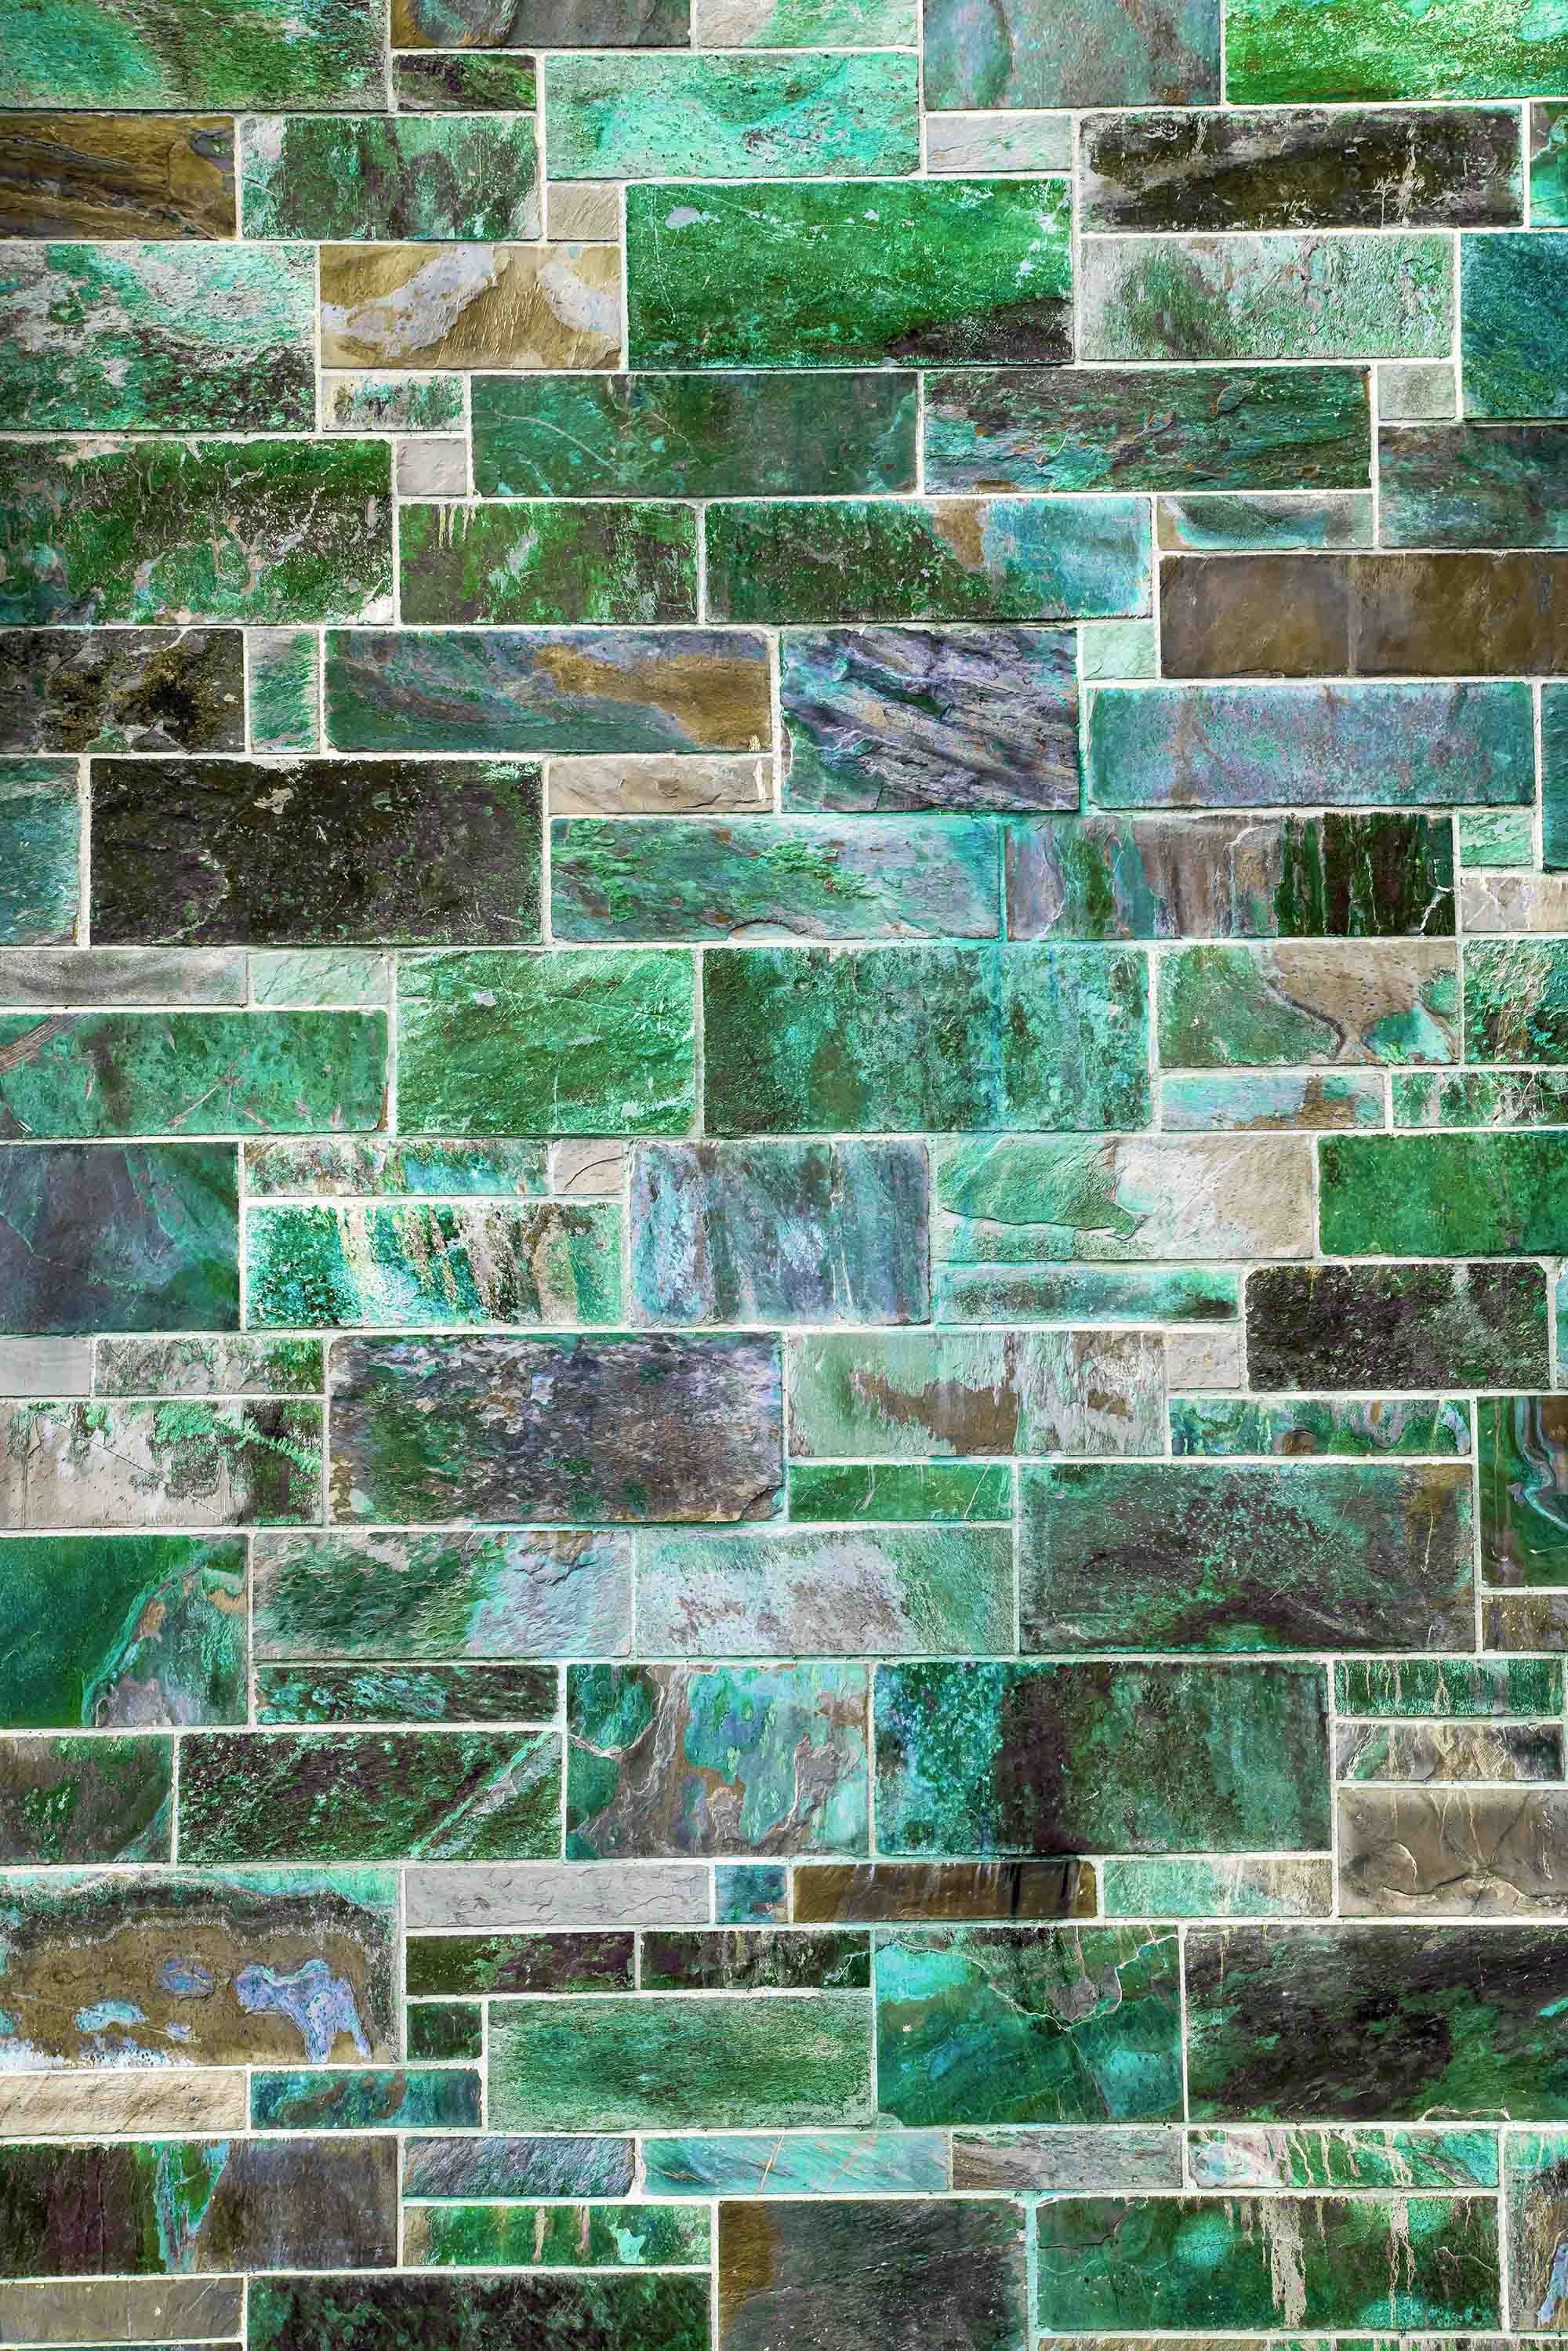 10 STONE WALL Background TEXTURES / DIGITAL BACKDROPS - GREEN